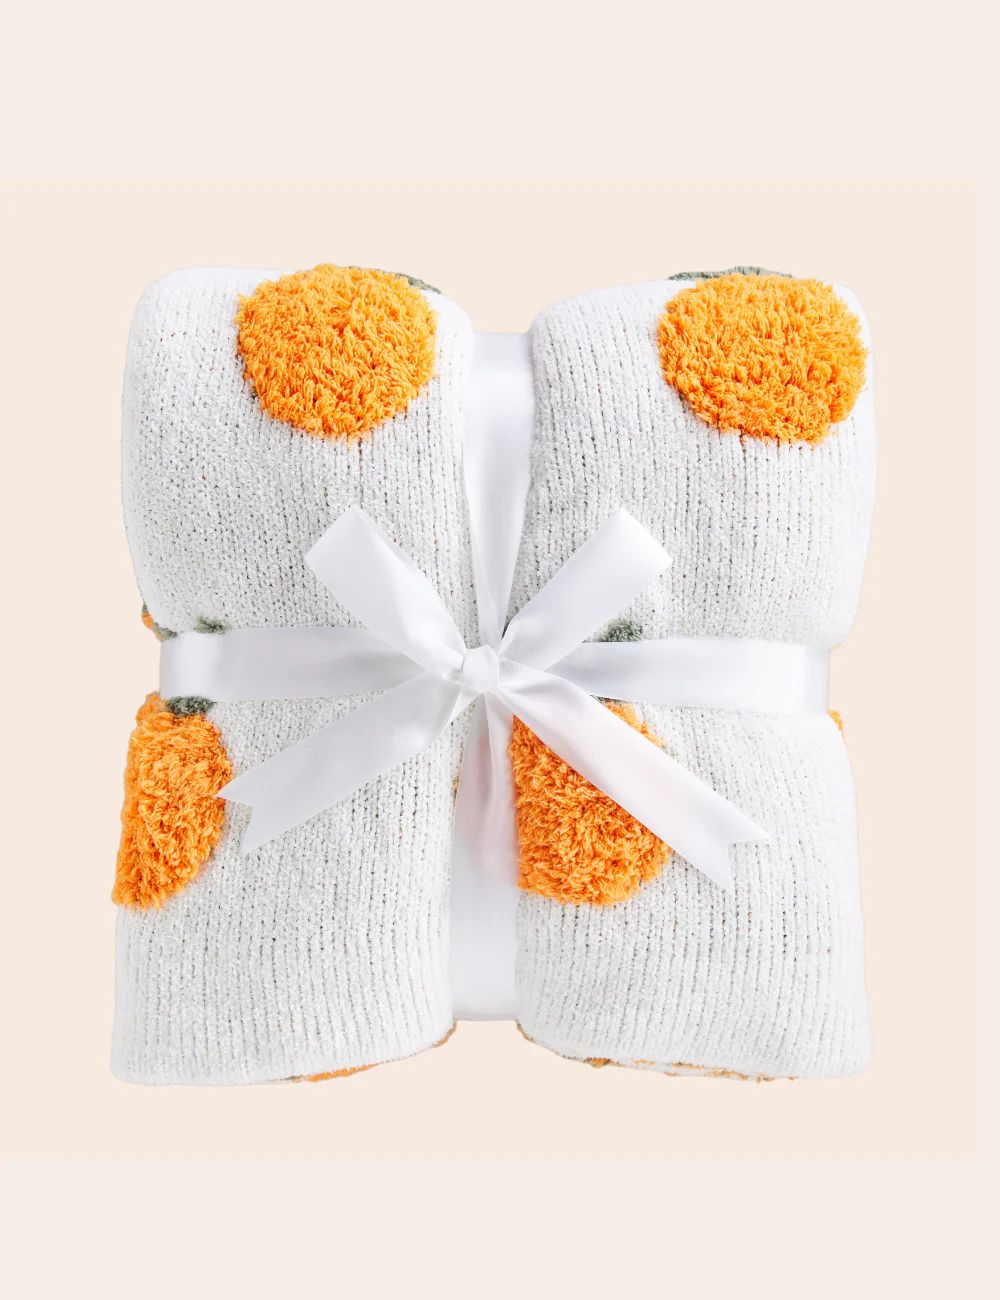 Oranges Buttery Blanket- Receiving Pre Order Feb. 15th | The Styled Collection